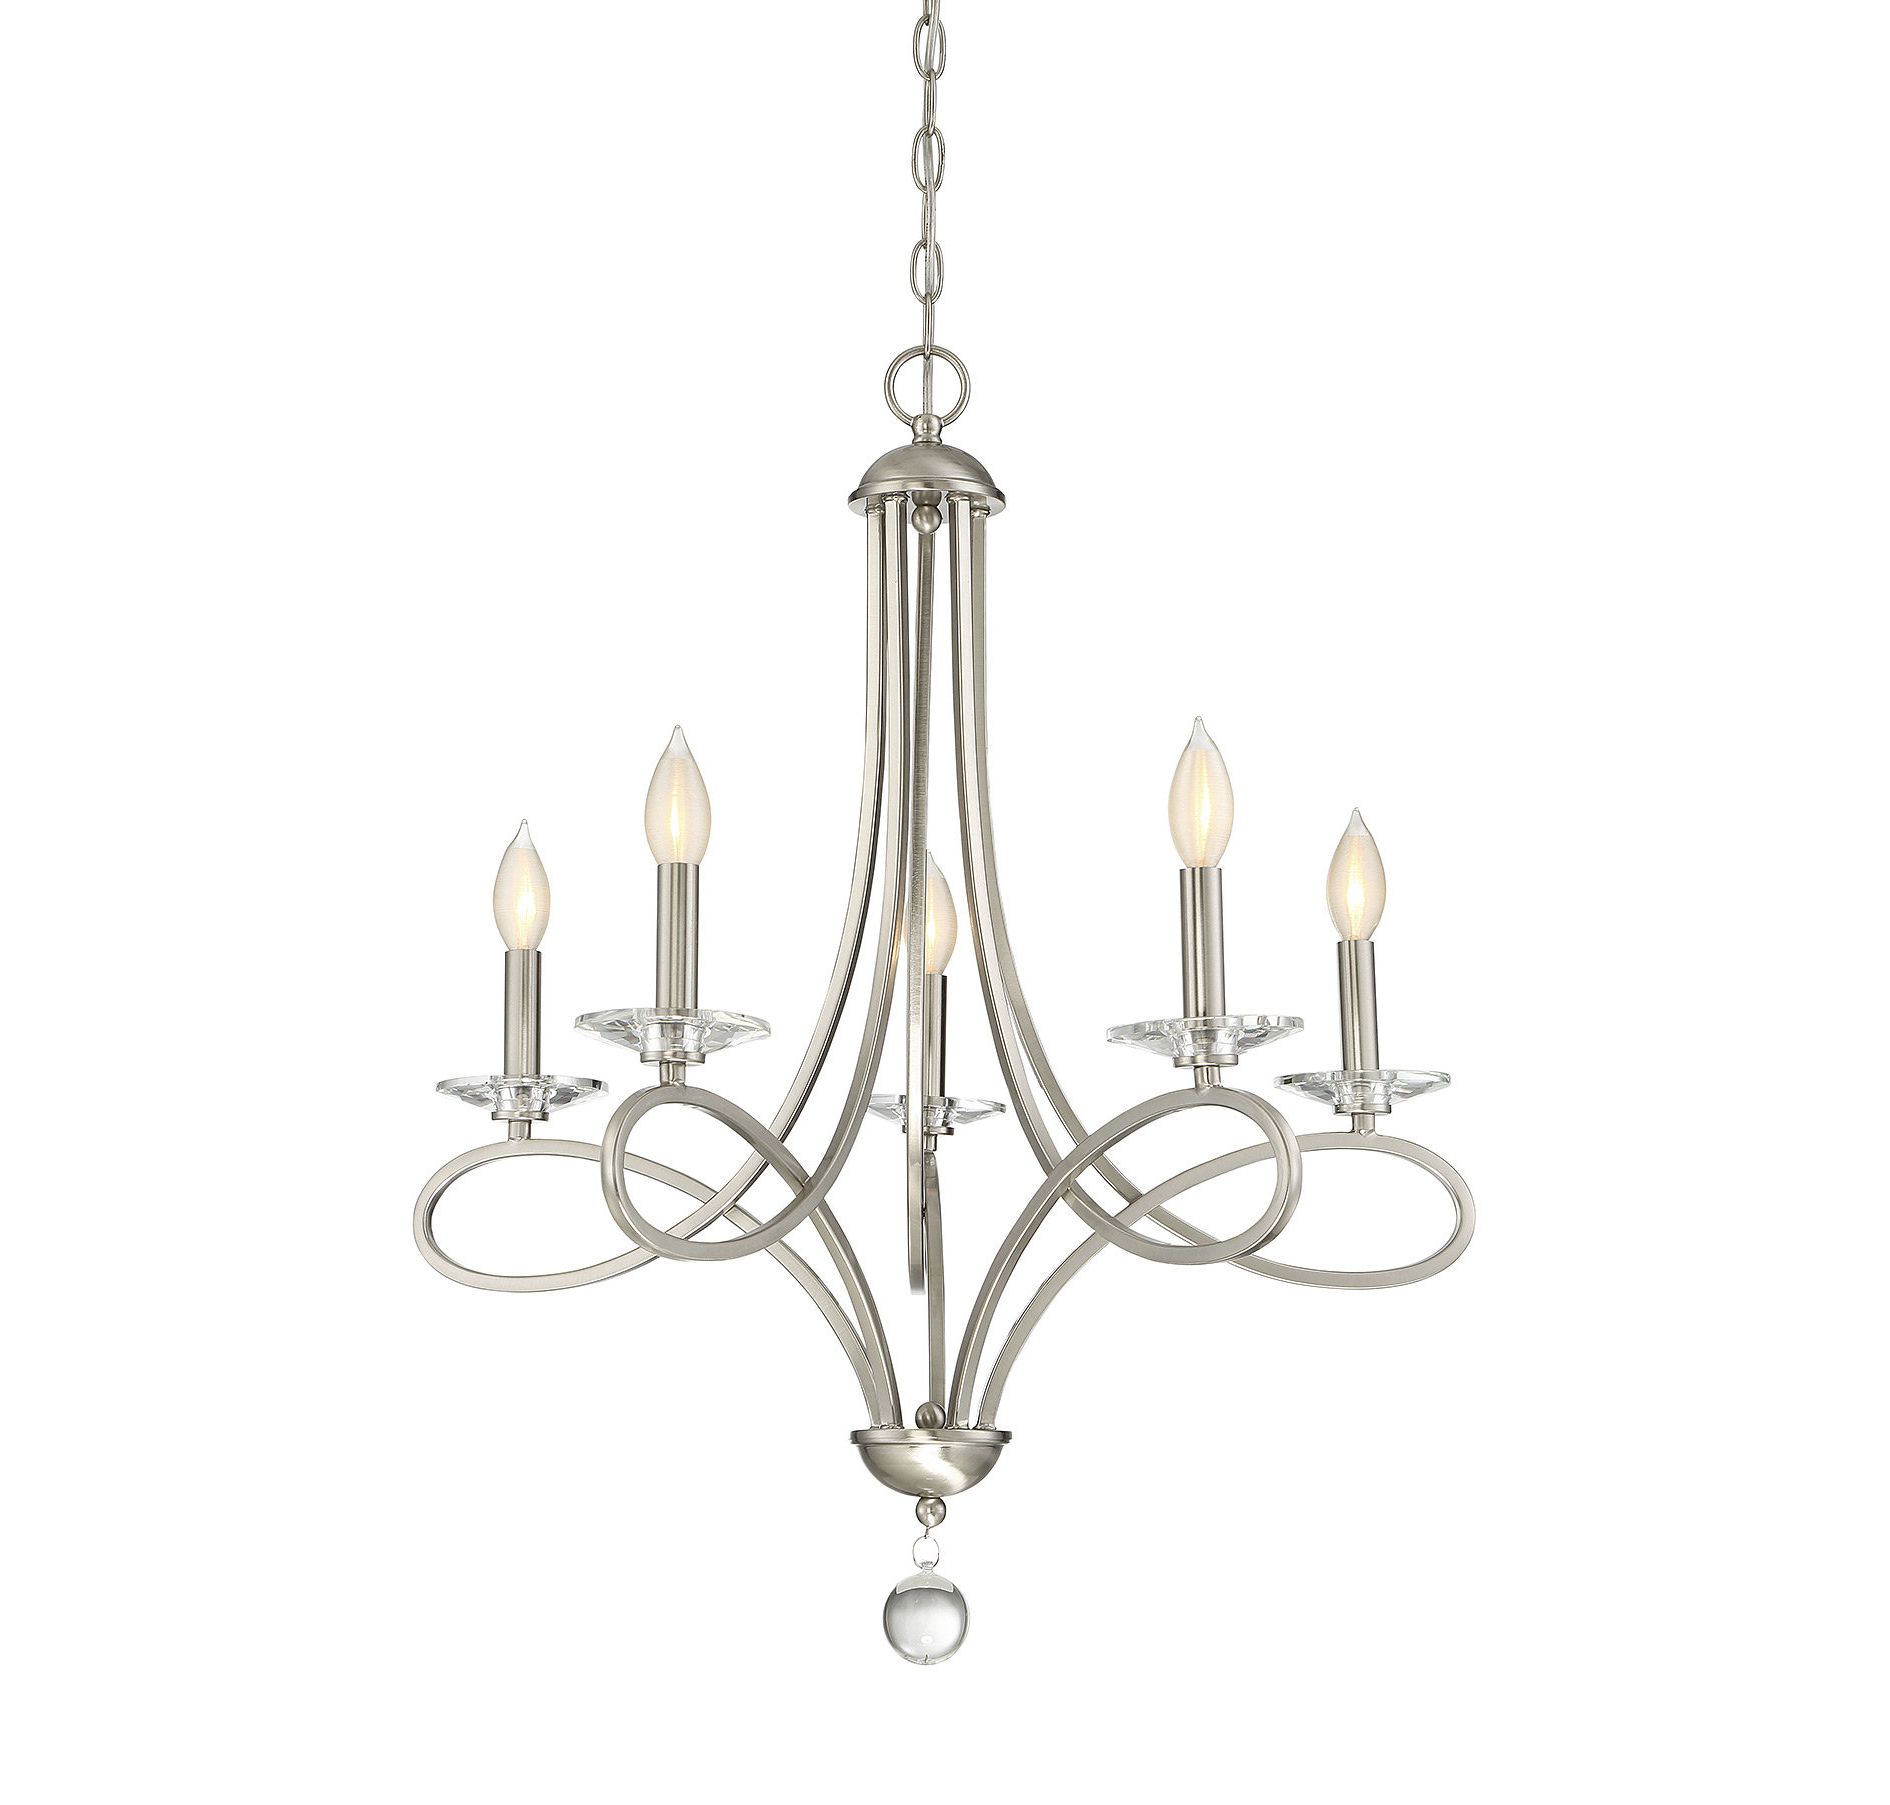 Willa Arlo Interiors Berger 5 Light Candle Style Chandelier Throughout Well Known Hesse 5 Light Candle Style Chandeliers (View 4 of 20)